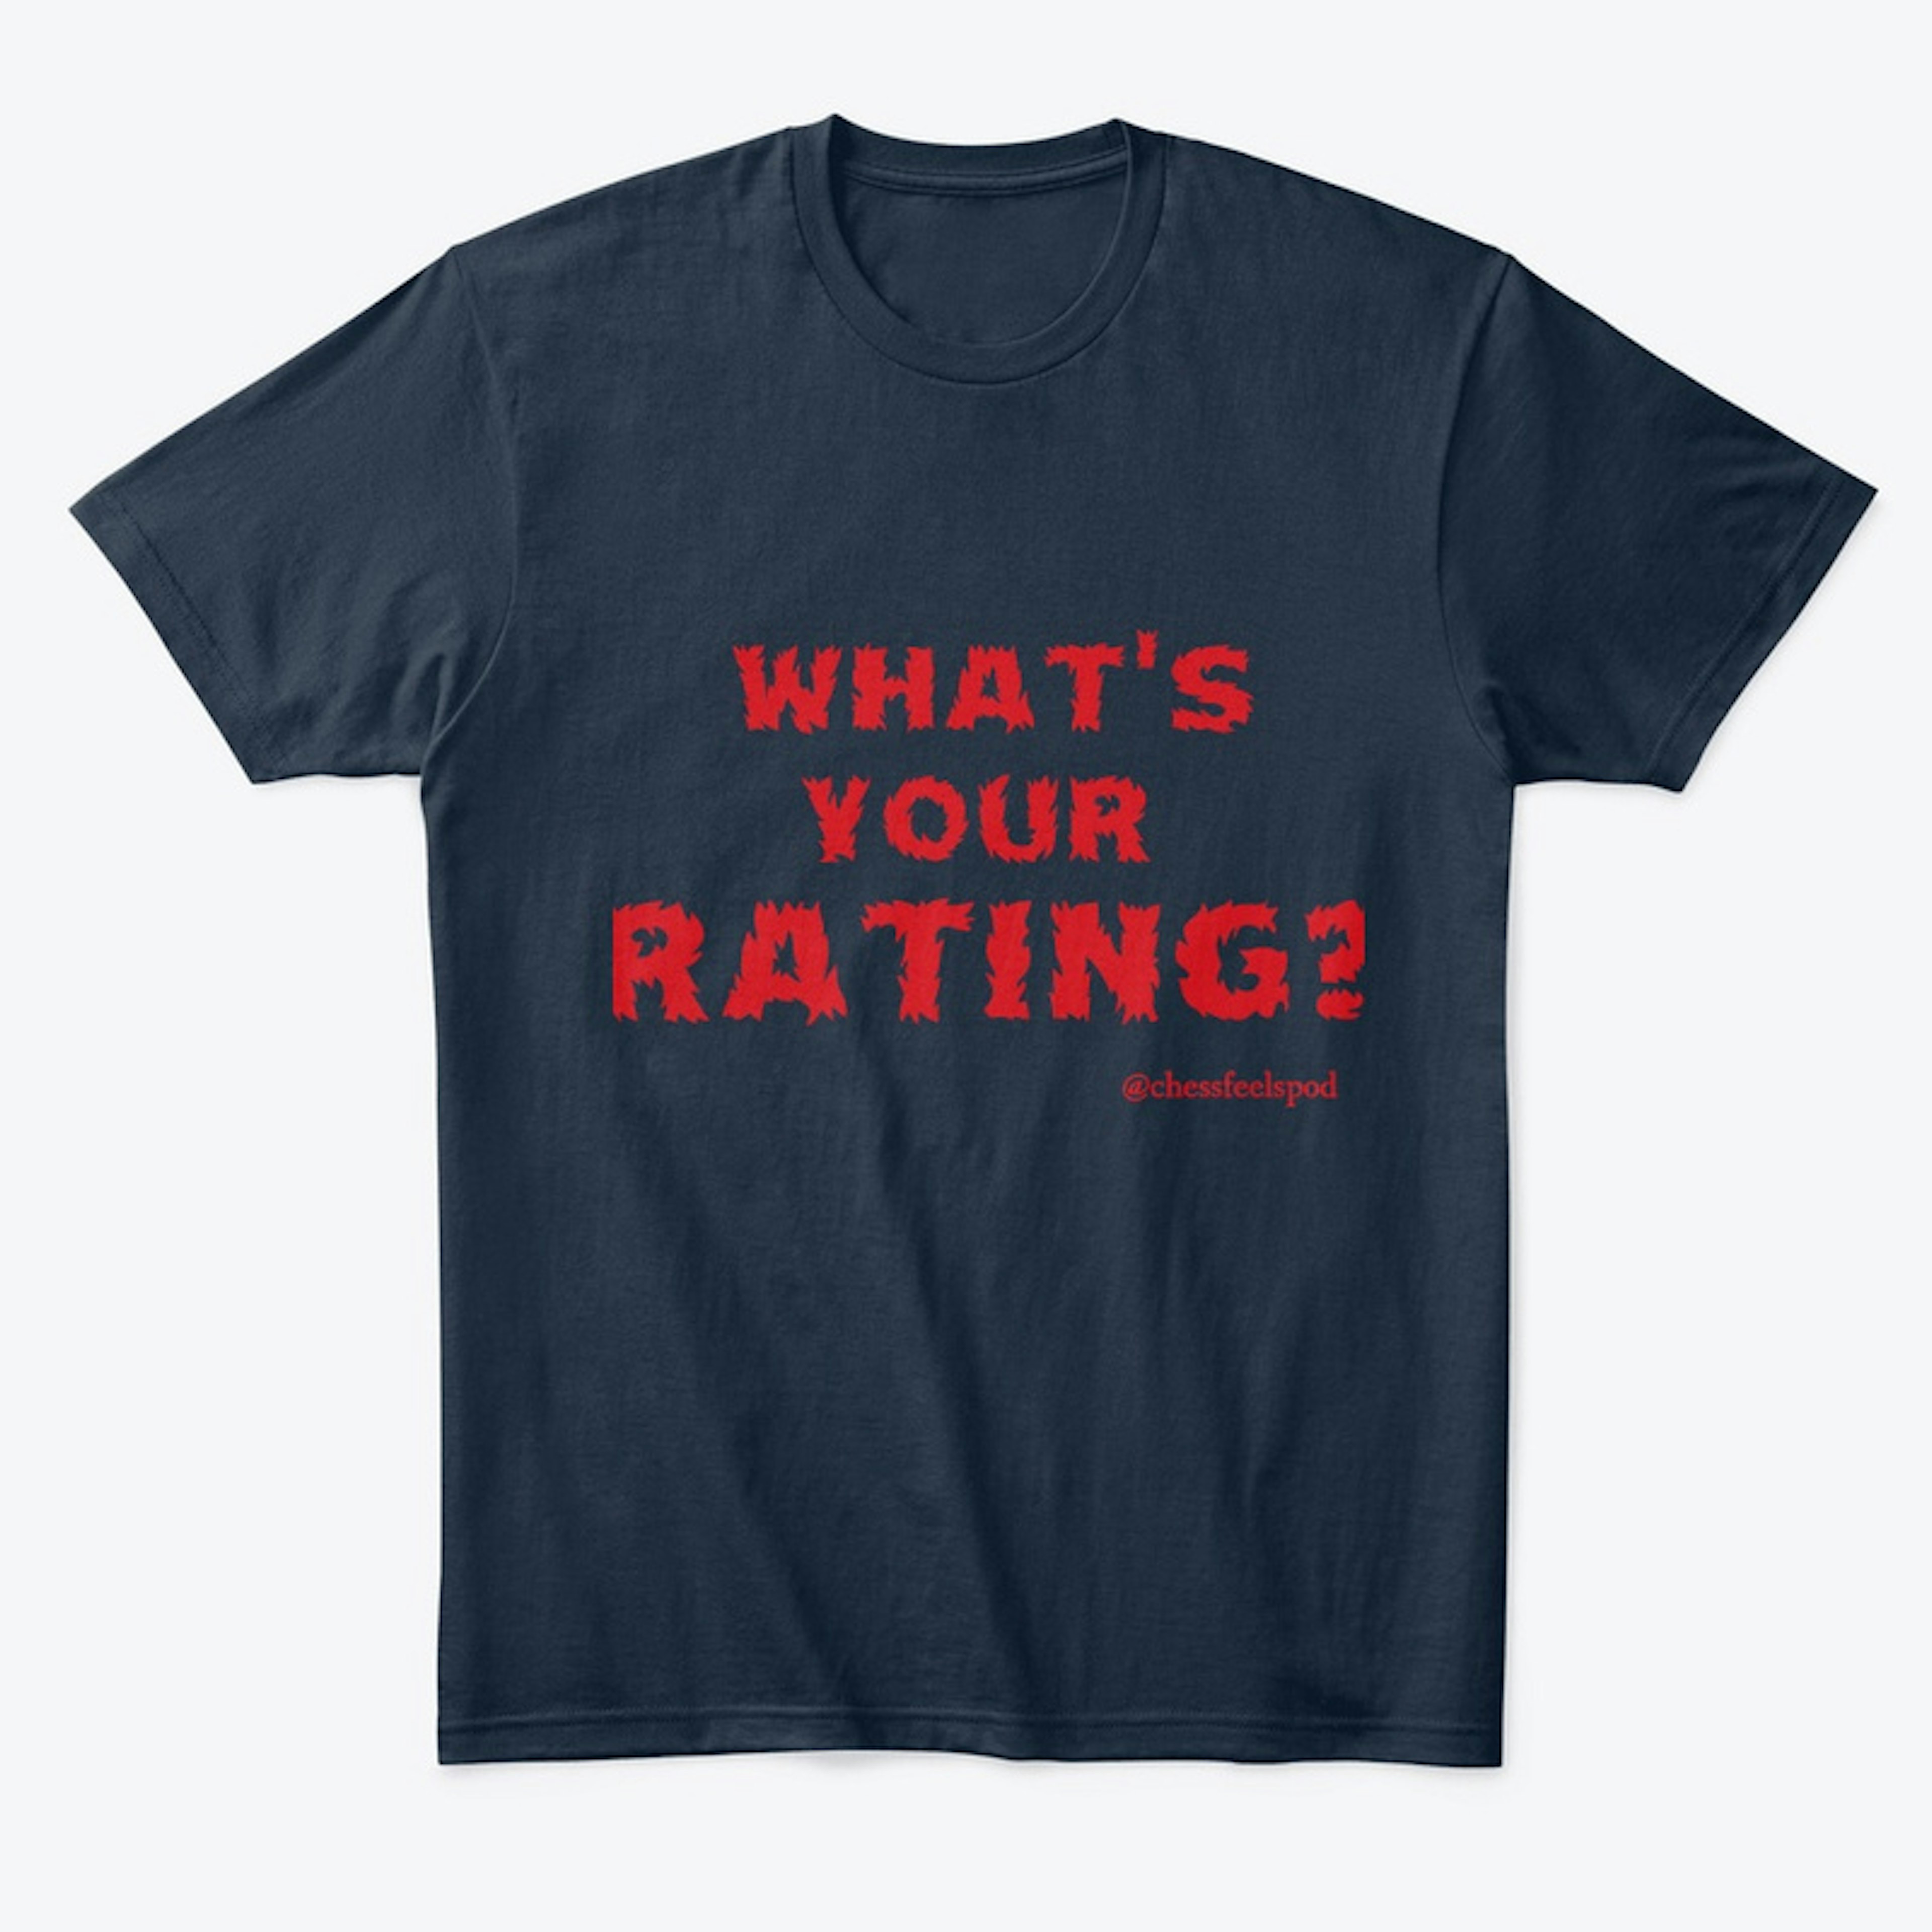 What's Your Rating?